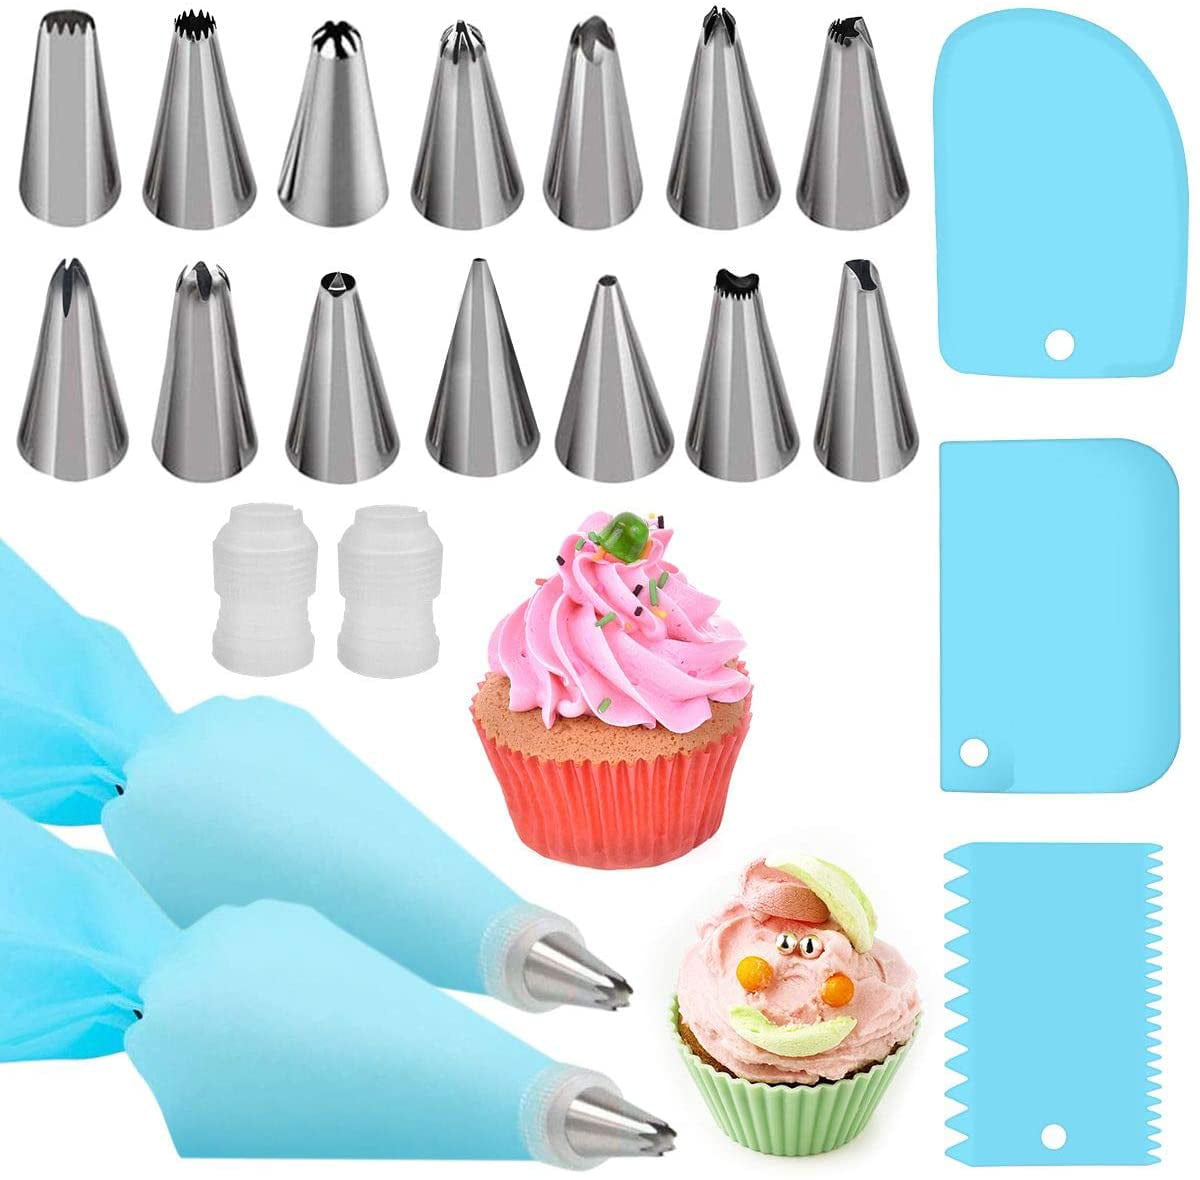 14 Icing Piping Kit Nozzles Coupler Bag Reusable Pastry Cake Decorating Gift Set 